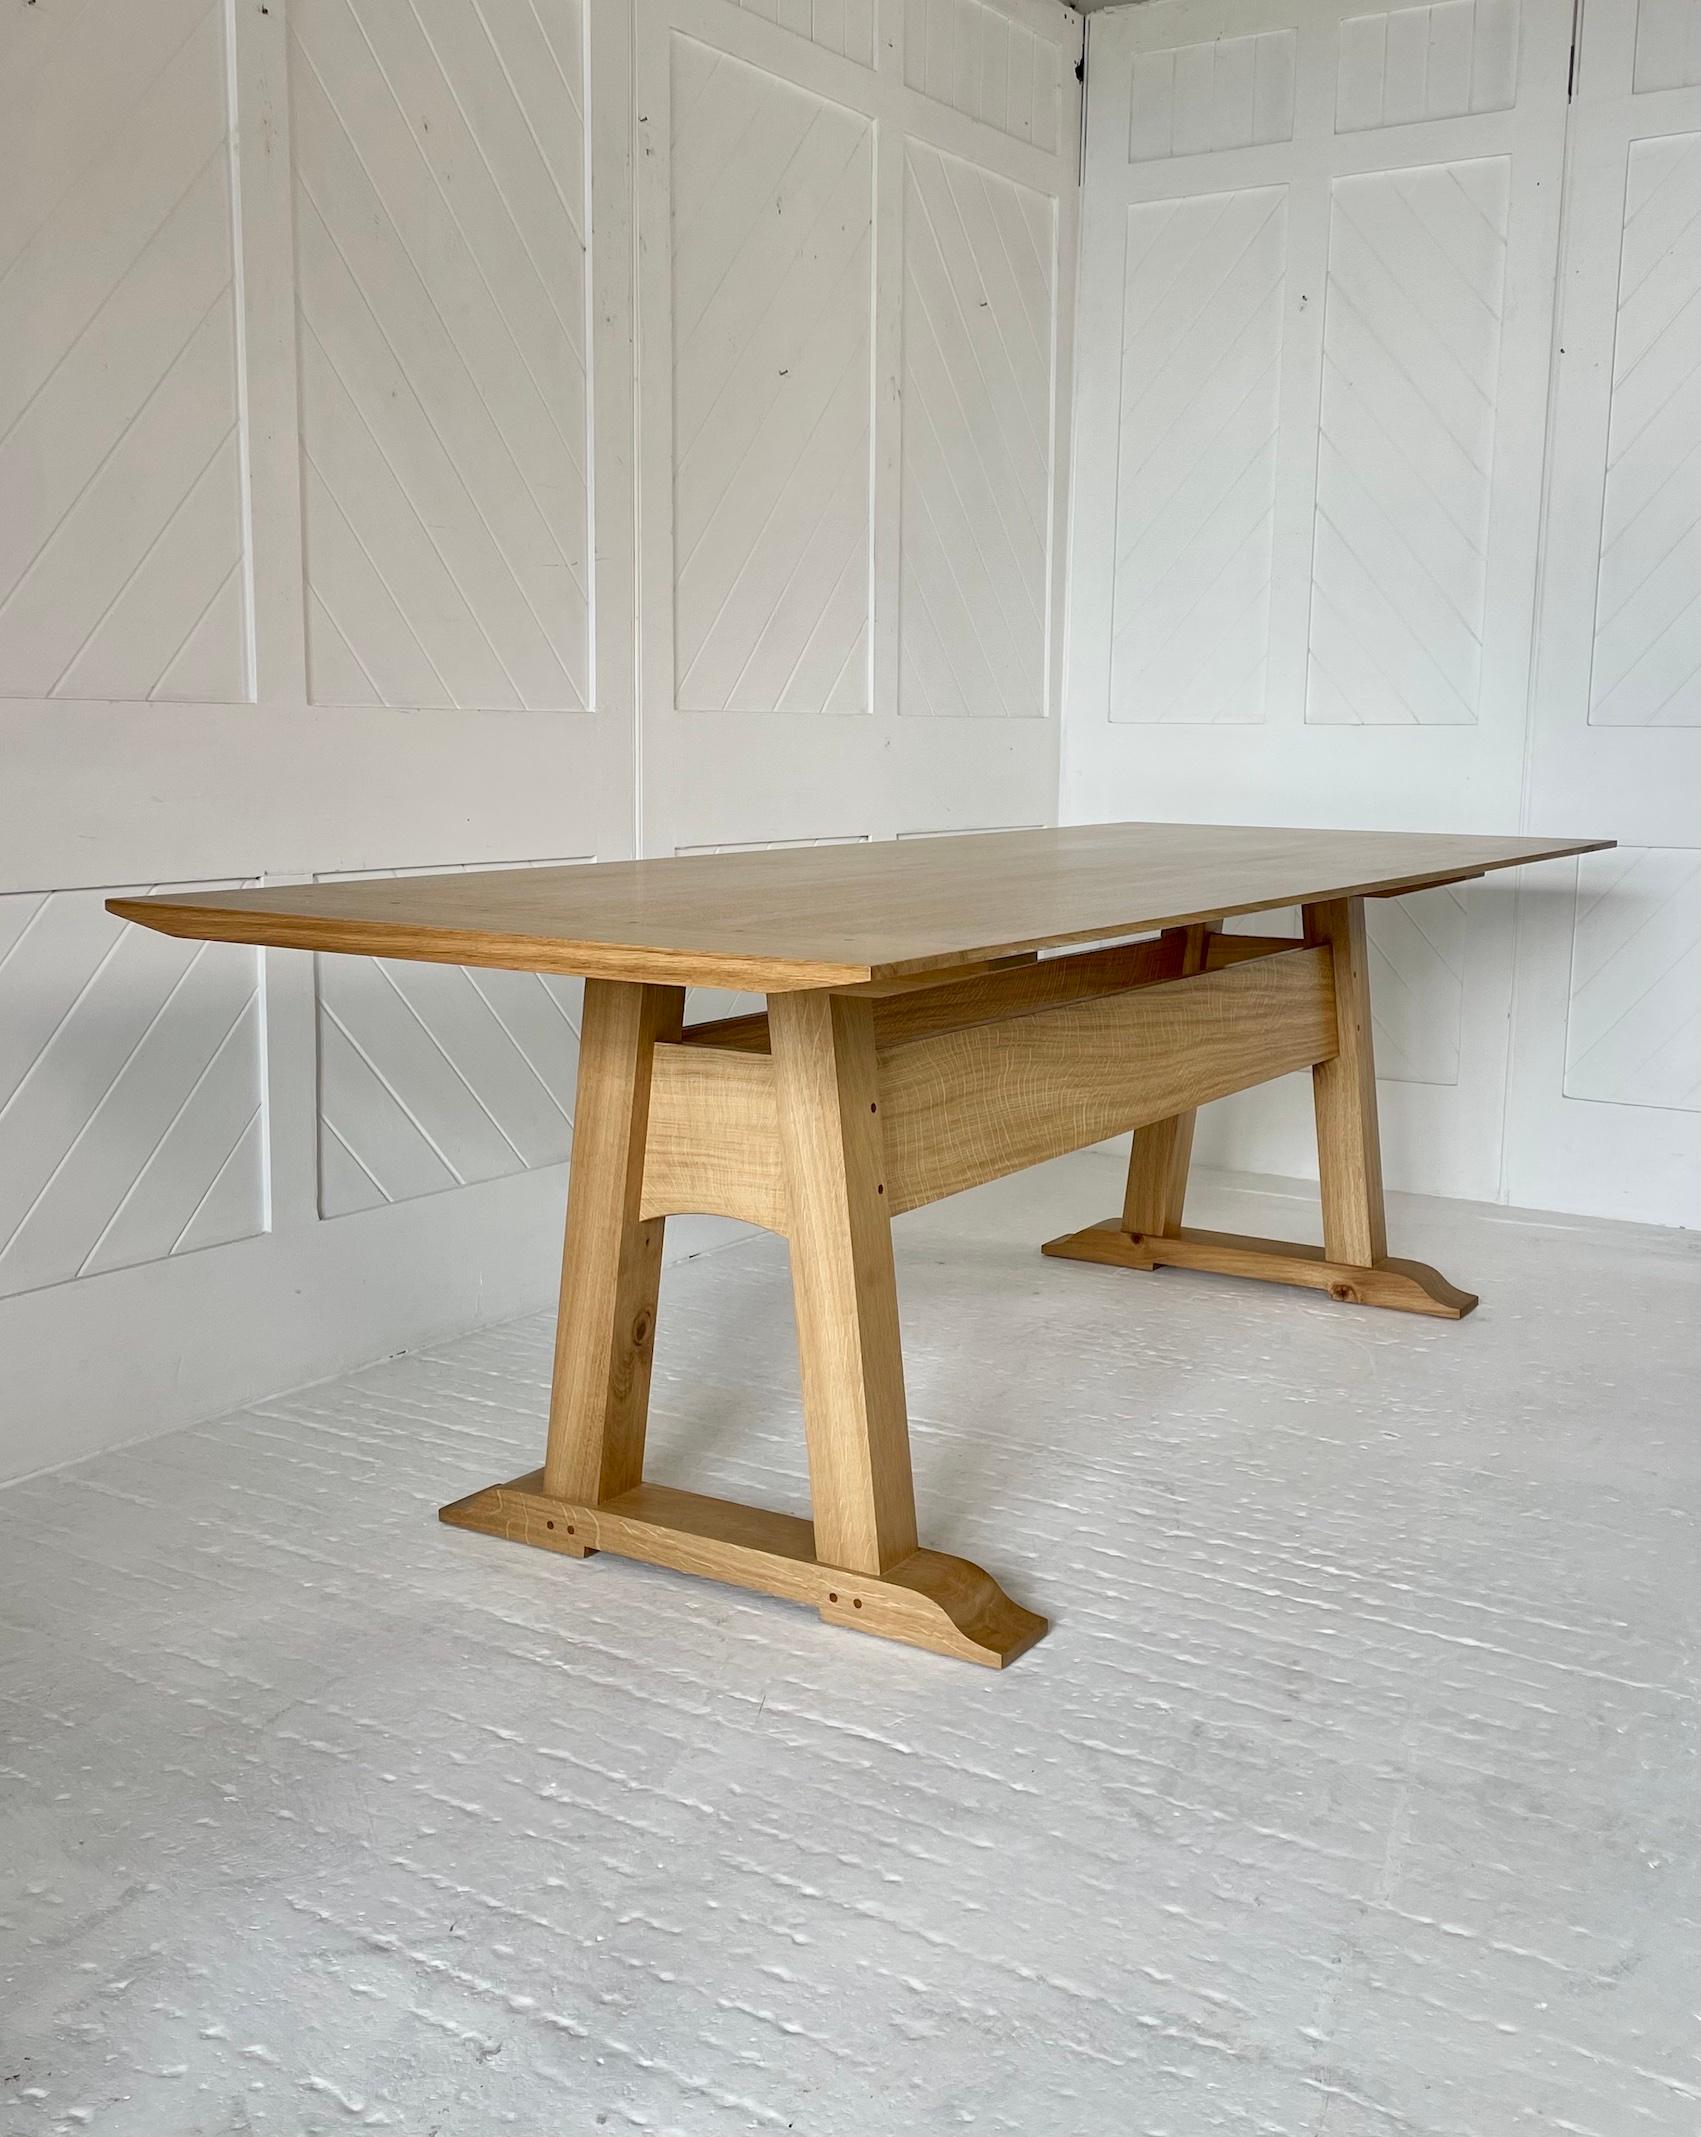 A 'Modern Day' 8 seater refectory table in lightly fumed English oak. .  Chamfered 3 plank solid quarter sawn oak top with cleated ends and pegged brown-oak dowels.

Three-quarter height full length stretchers. 

Trapezium shaped ends, curved rail